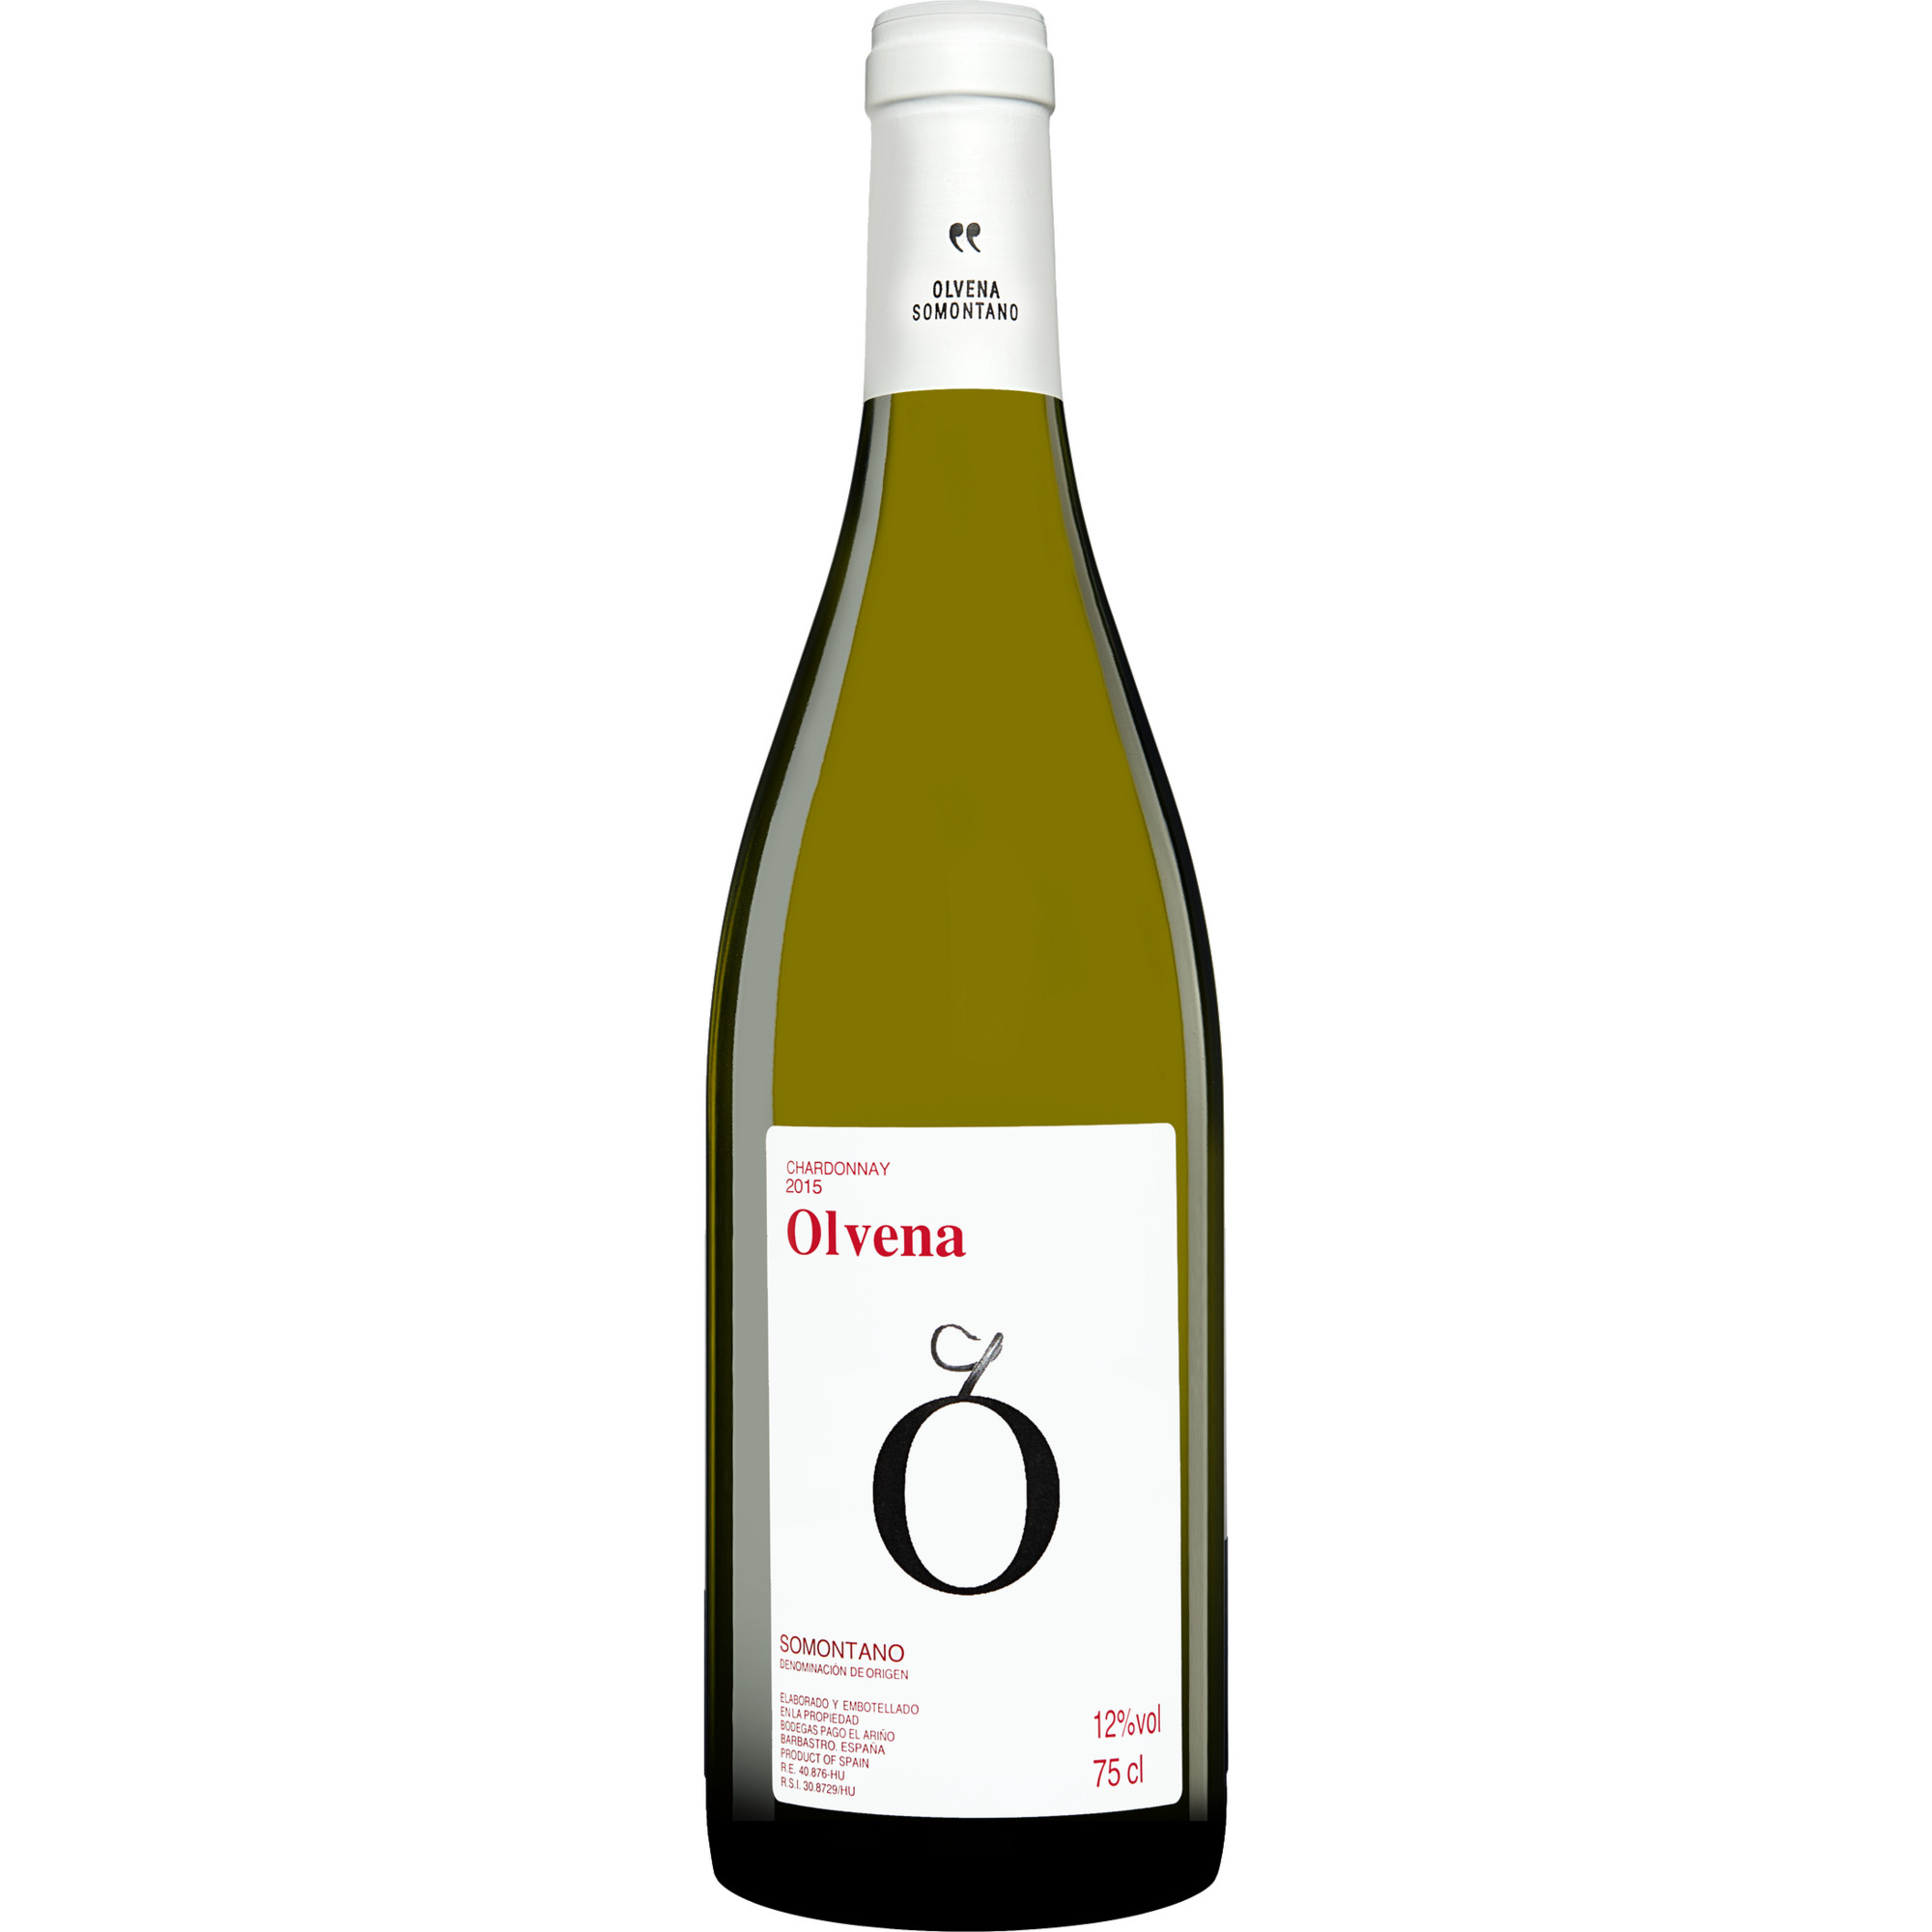 Bottle of Olvena Chardonnay from search results